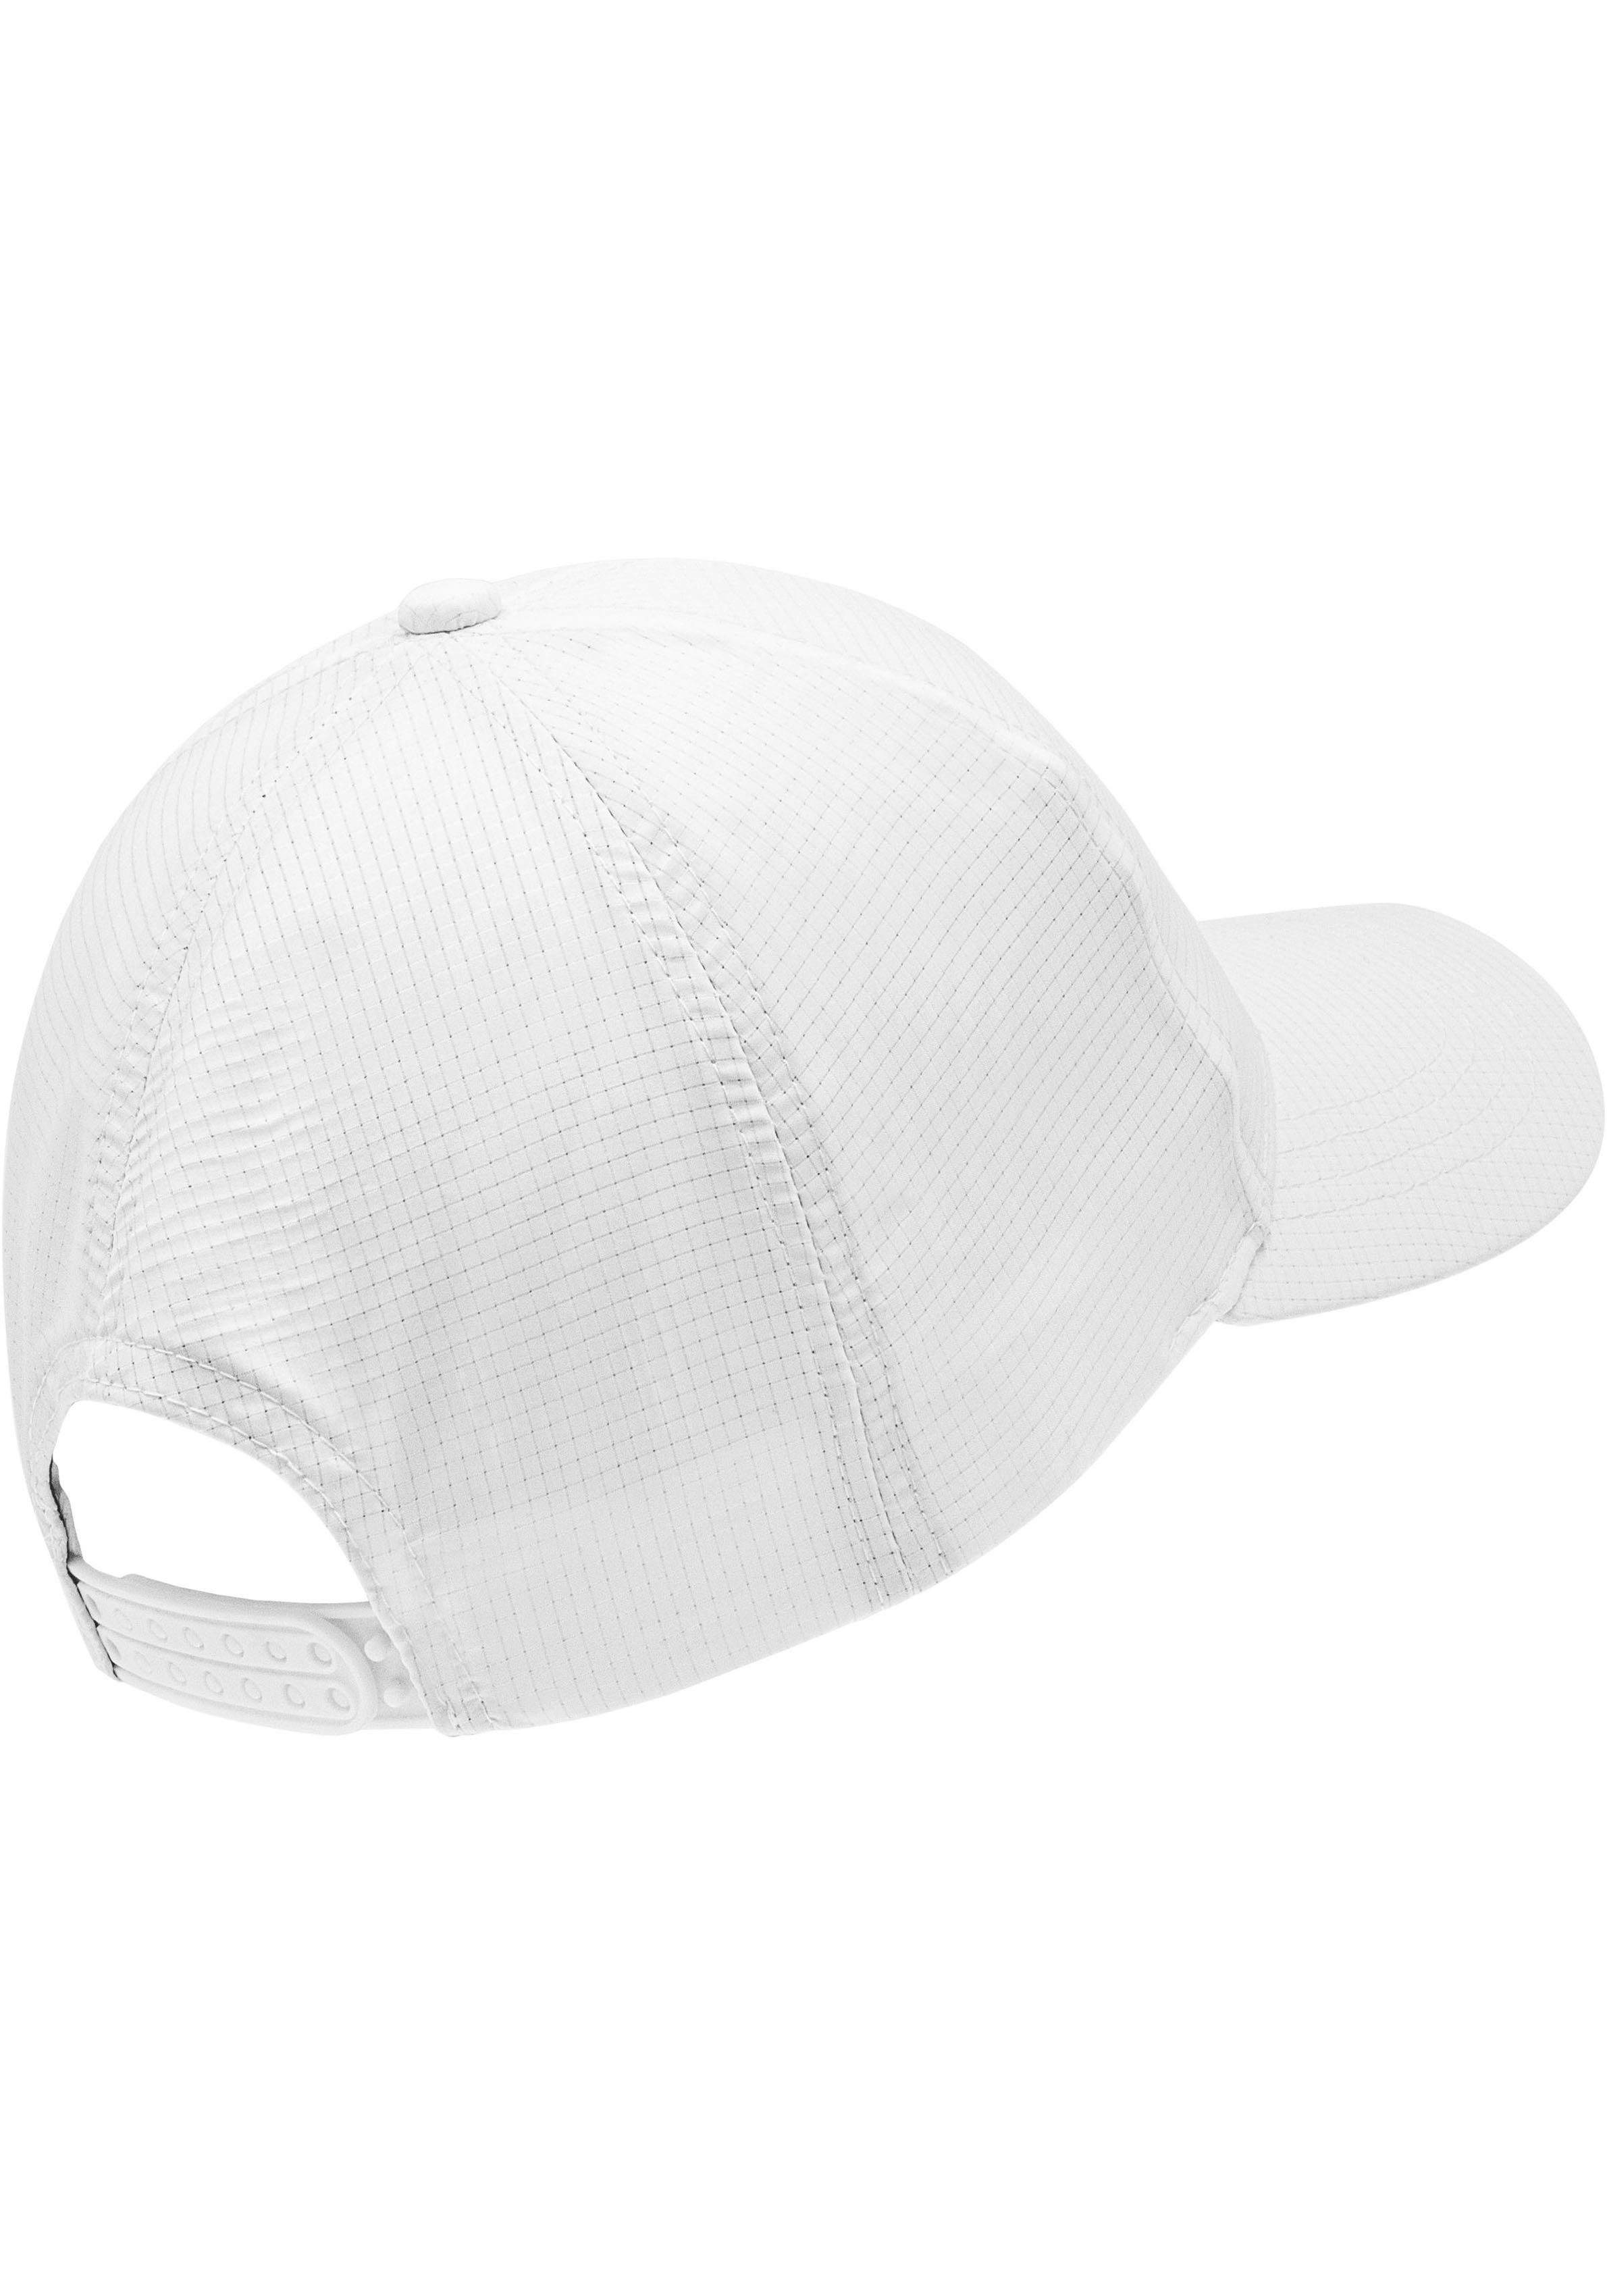 Hat Baseball Cap chillouts Langley weiß